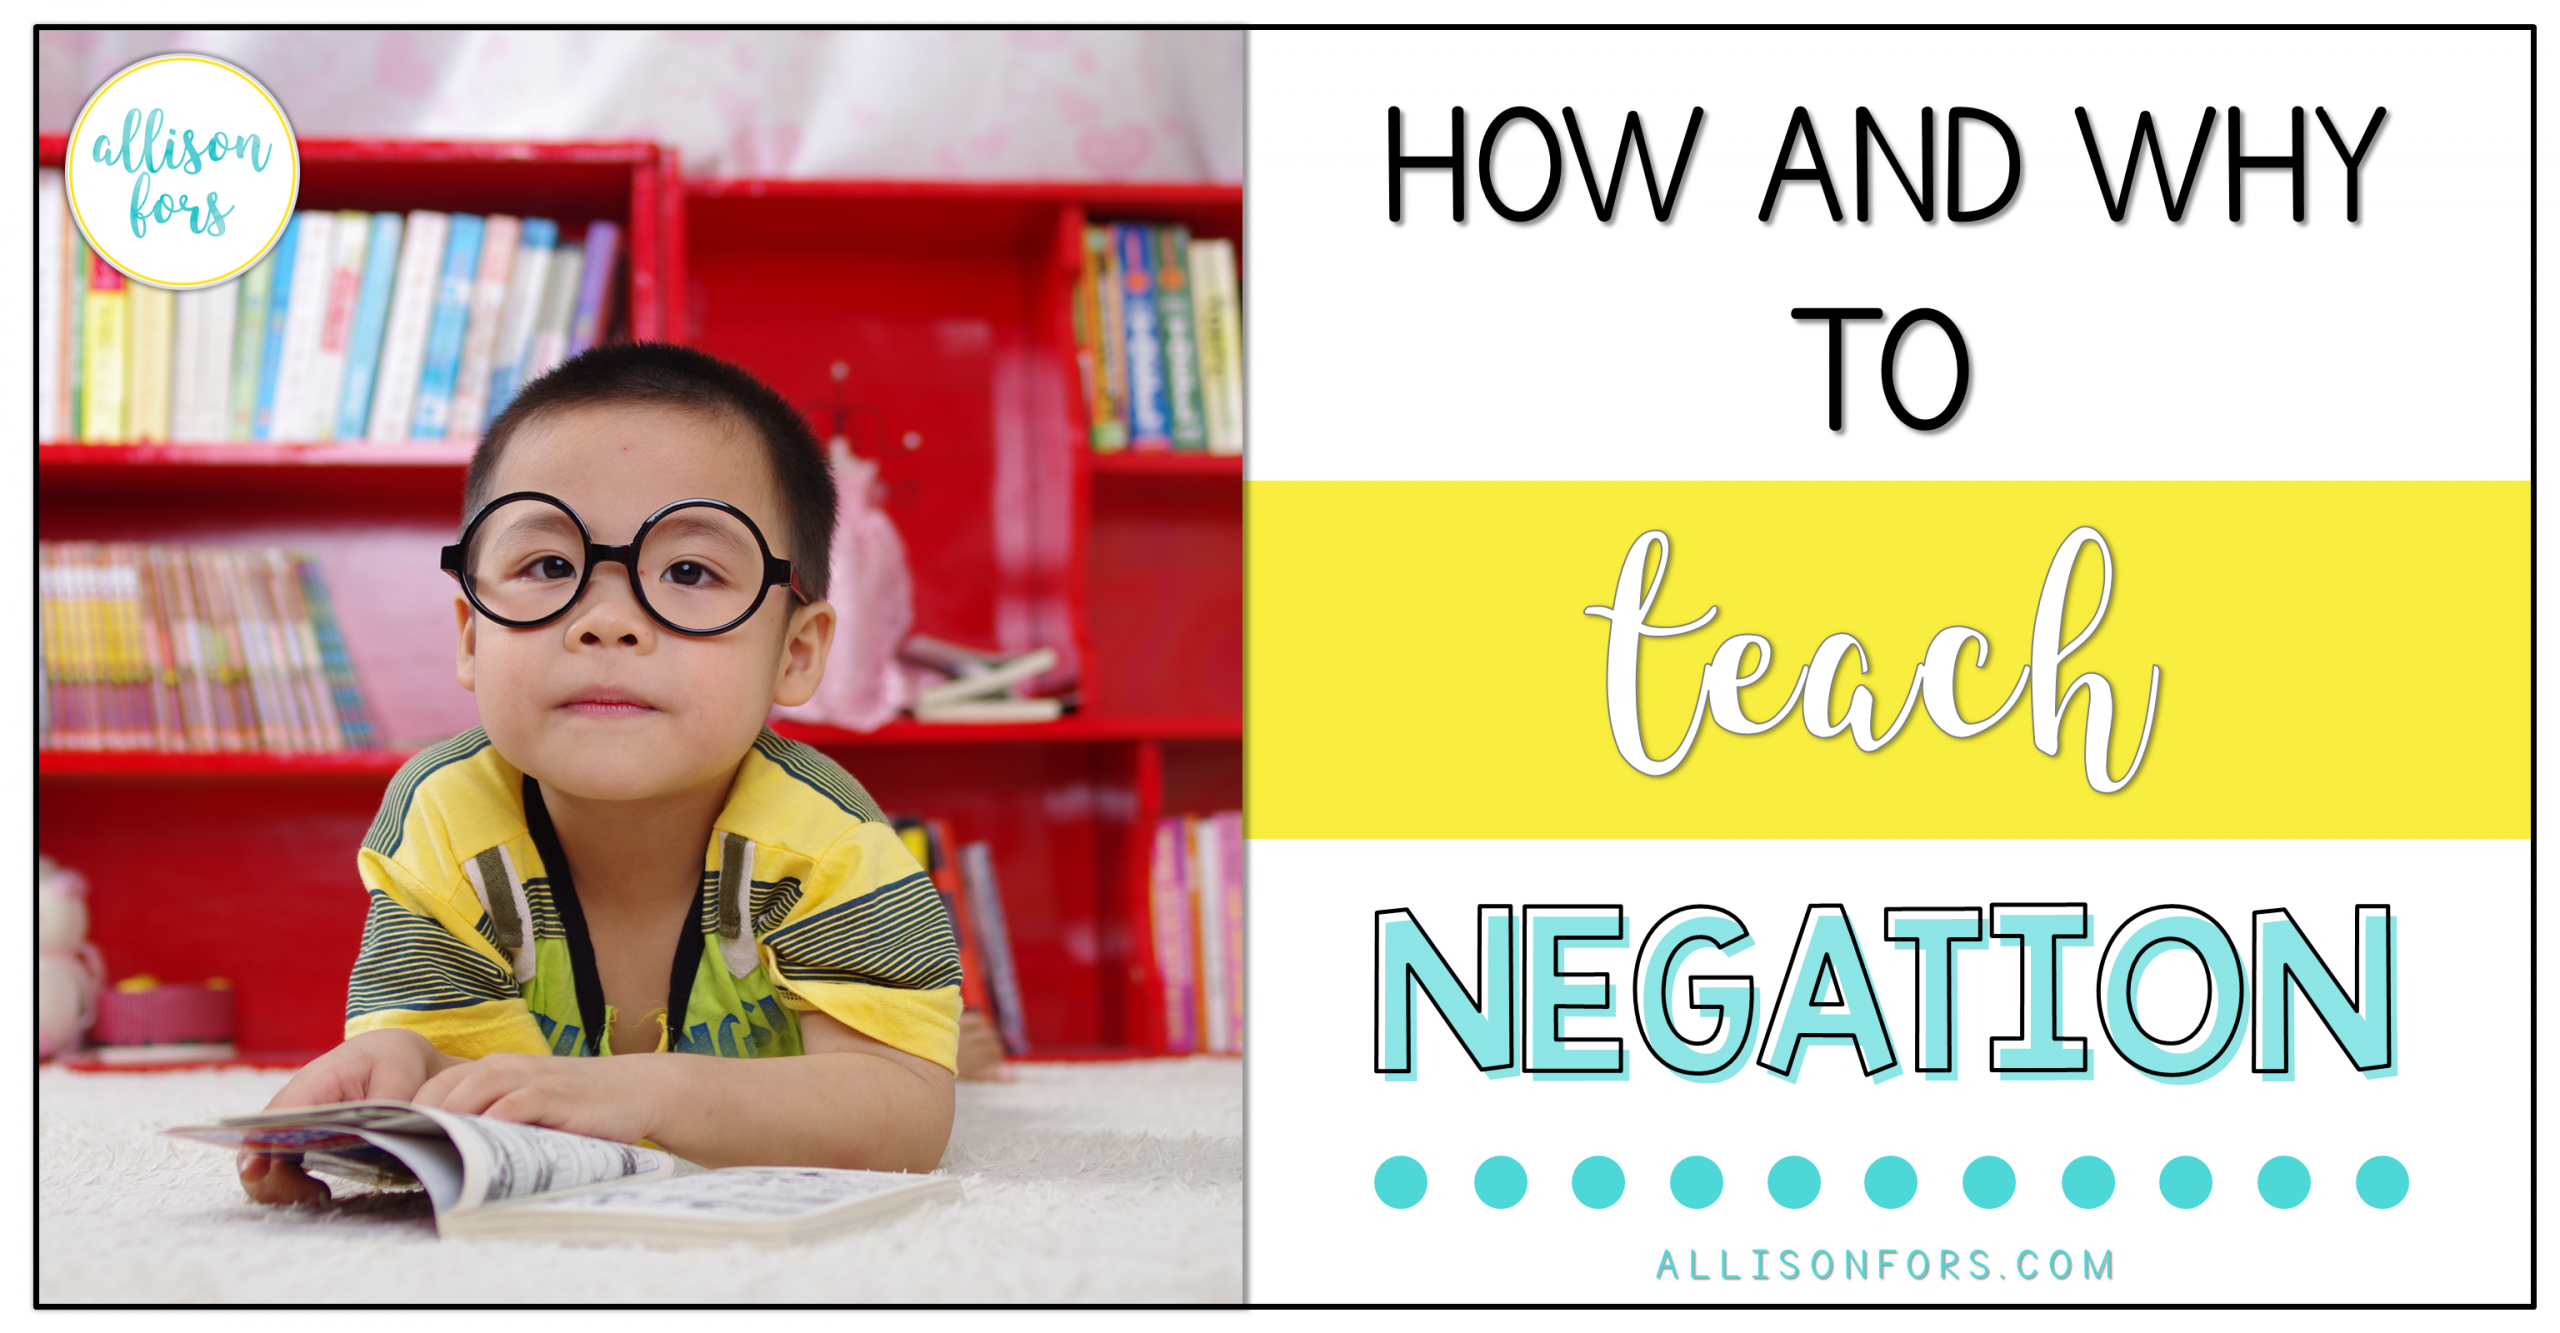 How and Why to Teach Negation